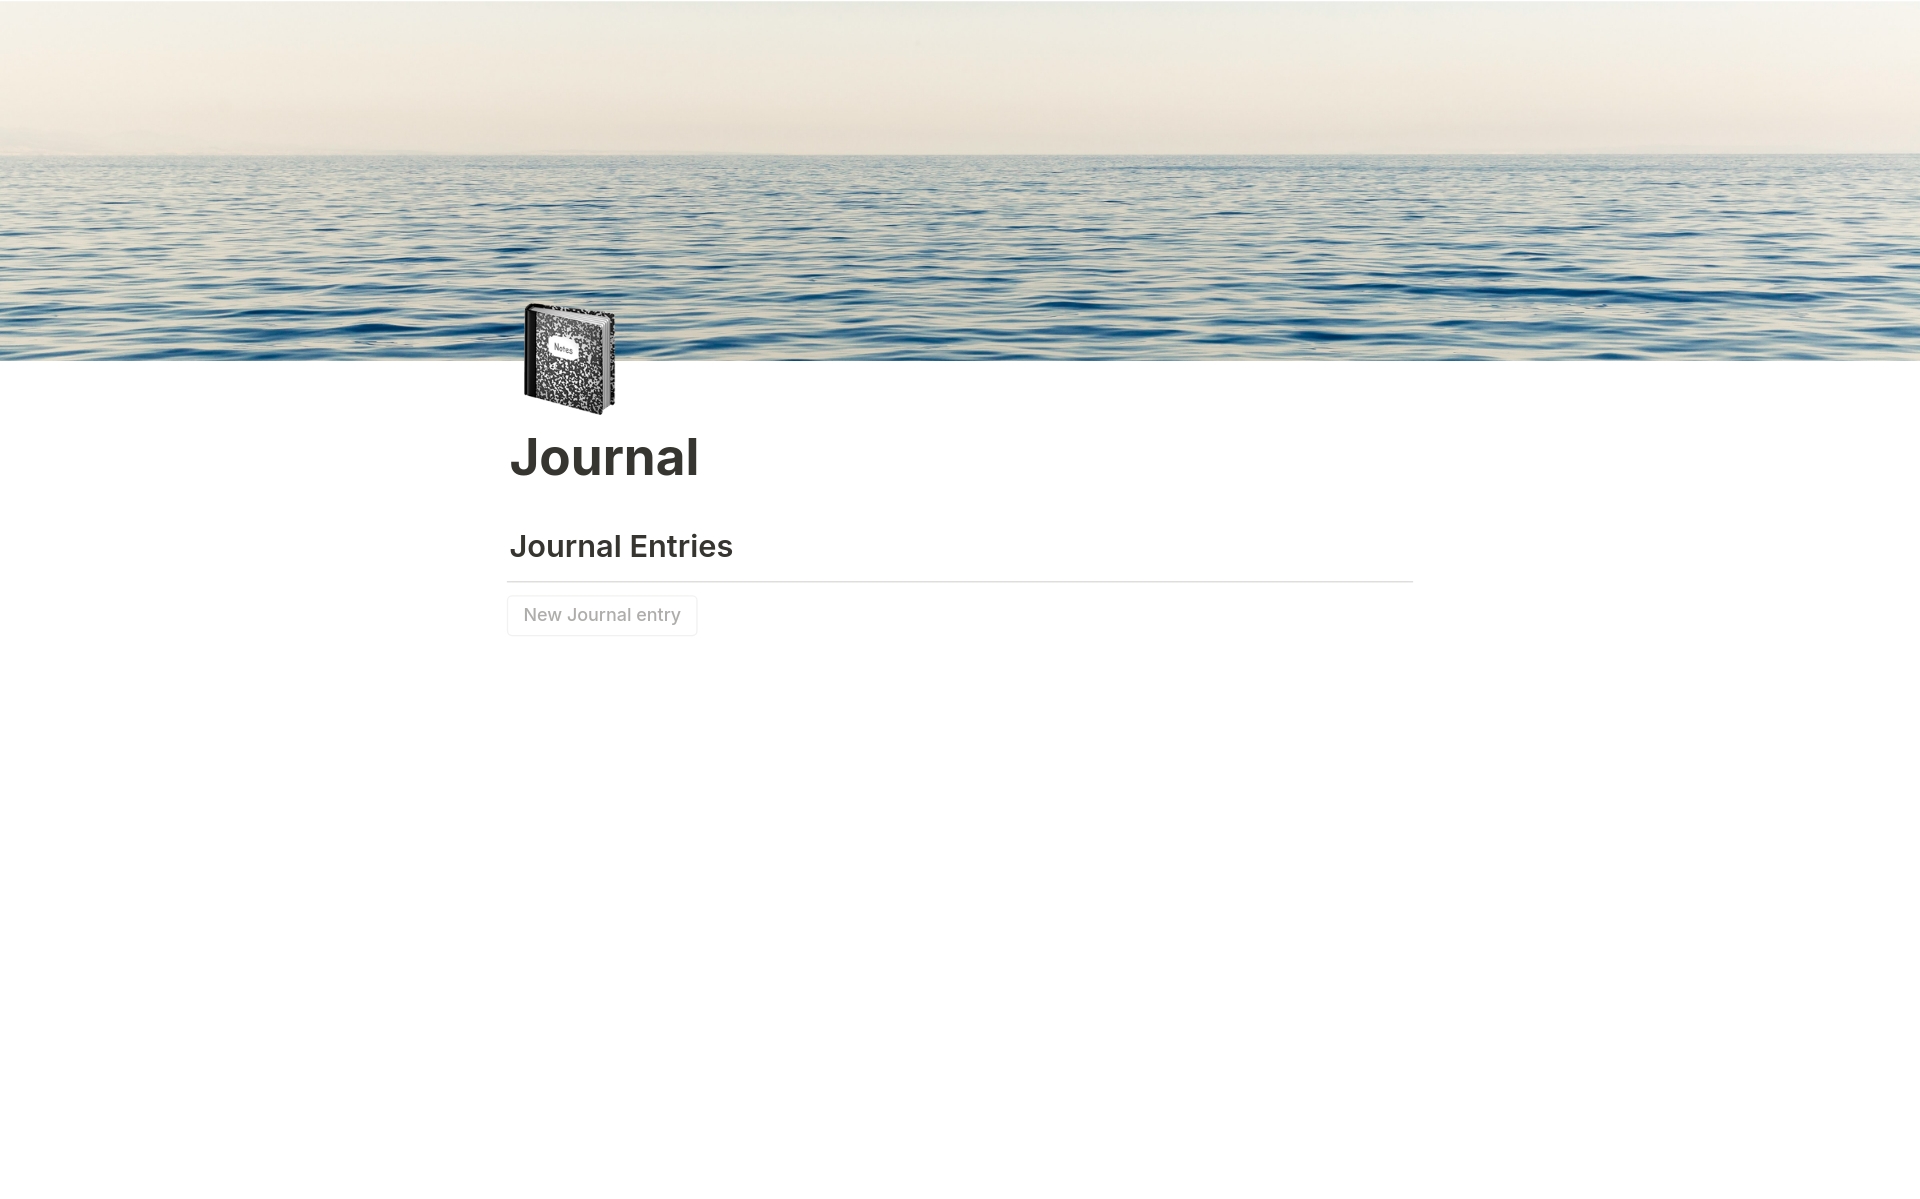 A minimalist journal. 
Create a new journal entry with a templated set of questions to answer every day.
This format has worked well for me and I hope others will enjoy it too.